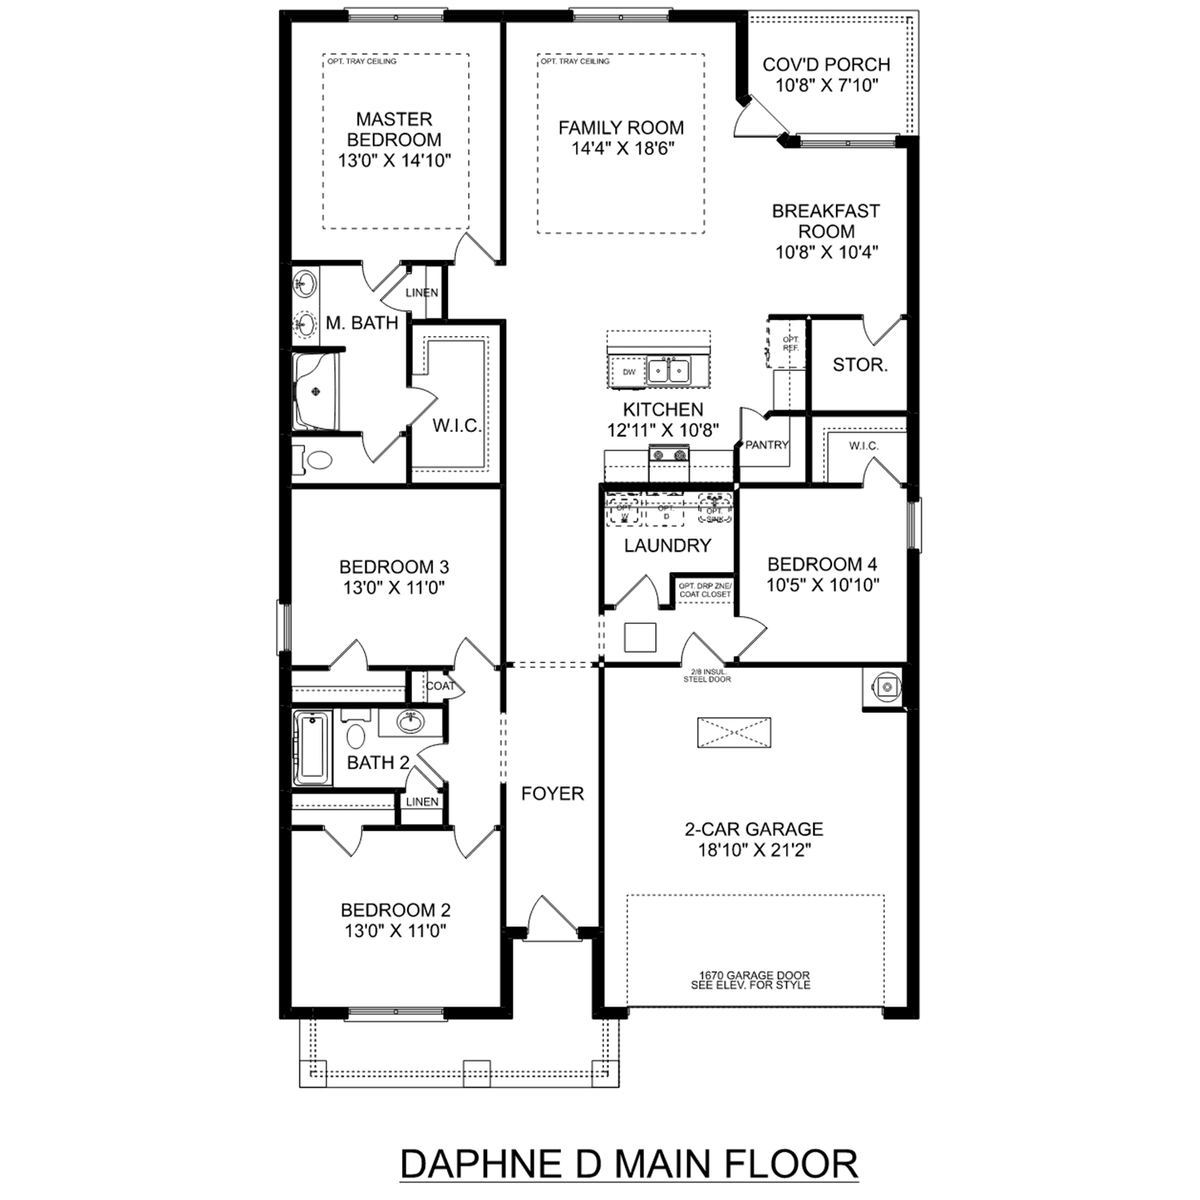 1 - The Daphne D floor plan layout for 109 Silkwood Court in Davidson Homes' Williams Pointe community.